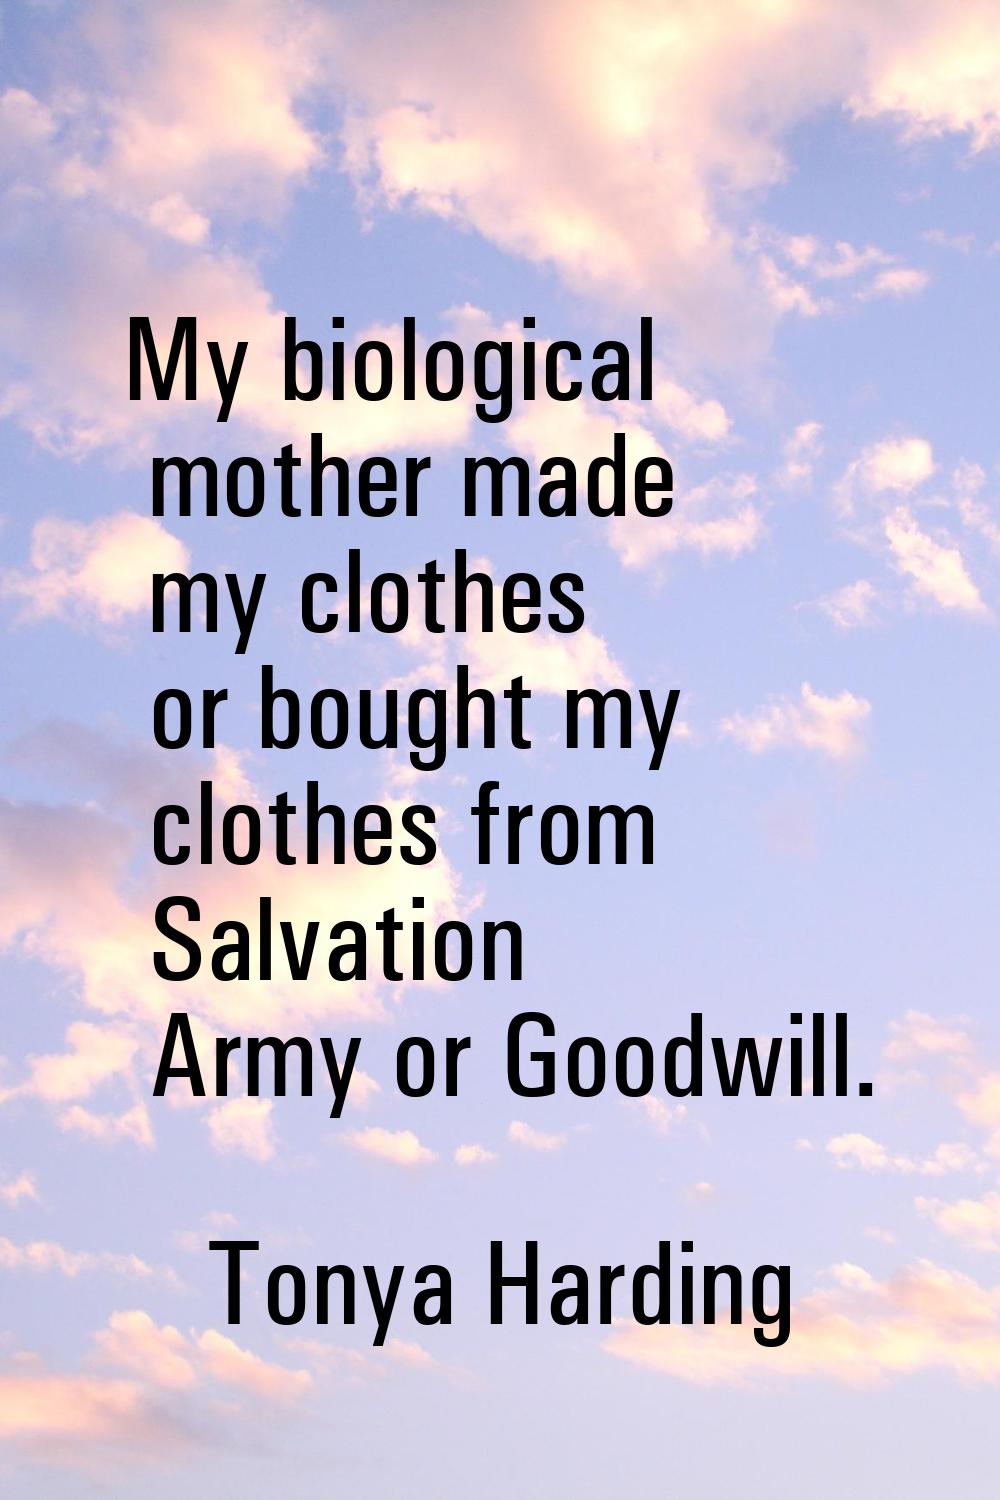 My biological mother made my clothes or bought my clothes from Salvation Army or Goodwill.